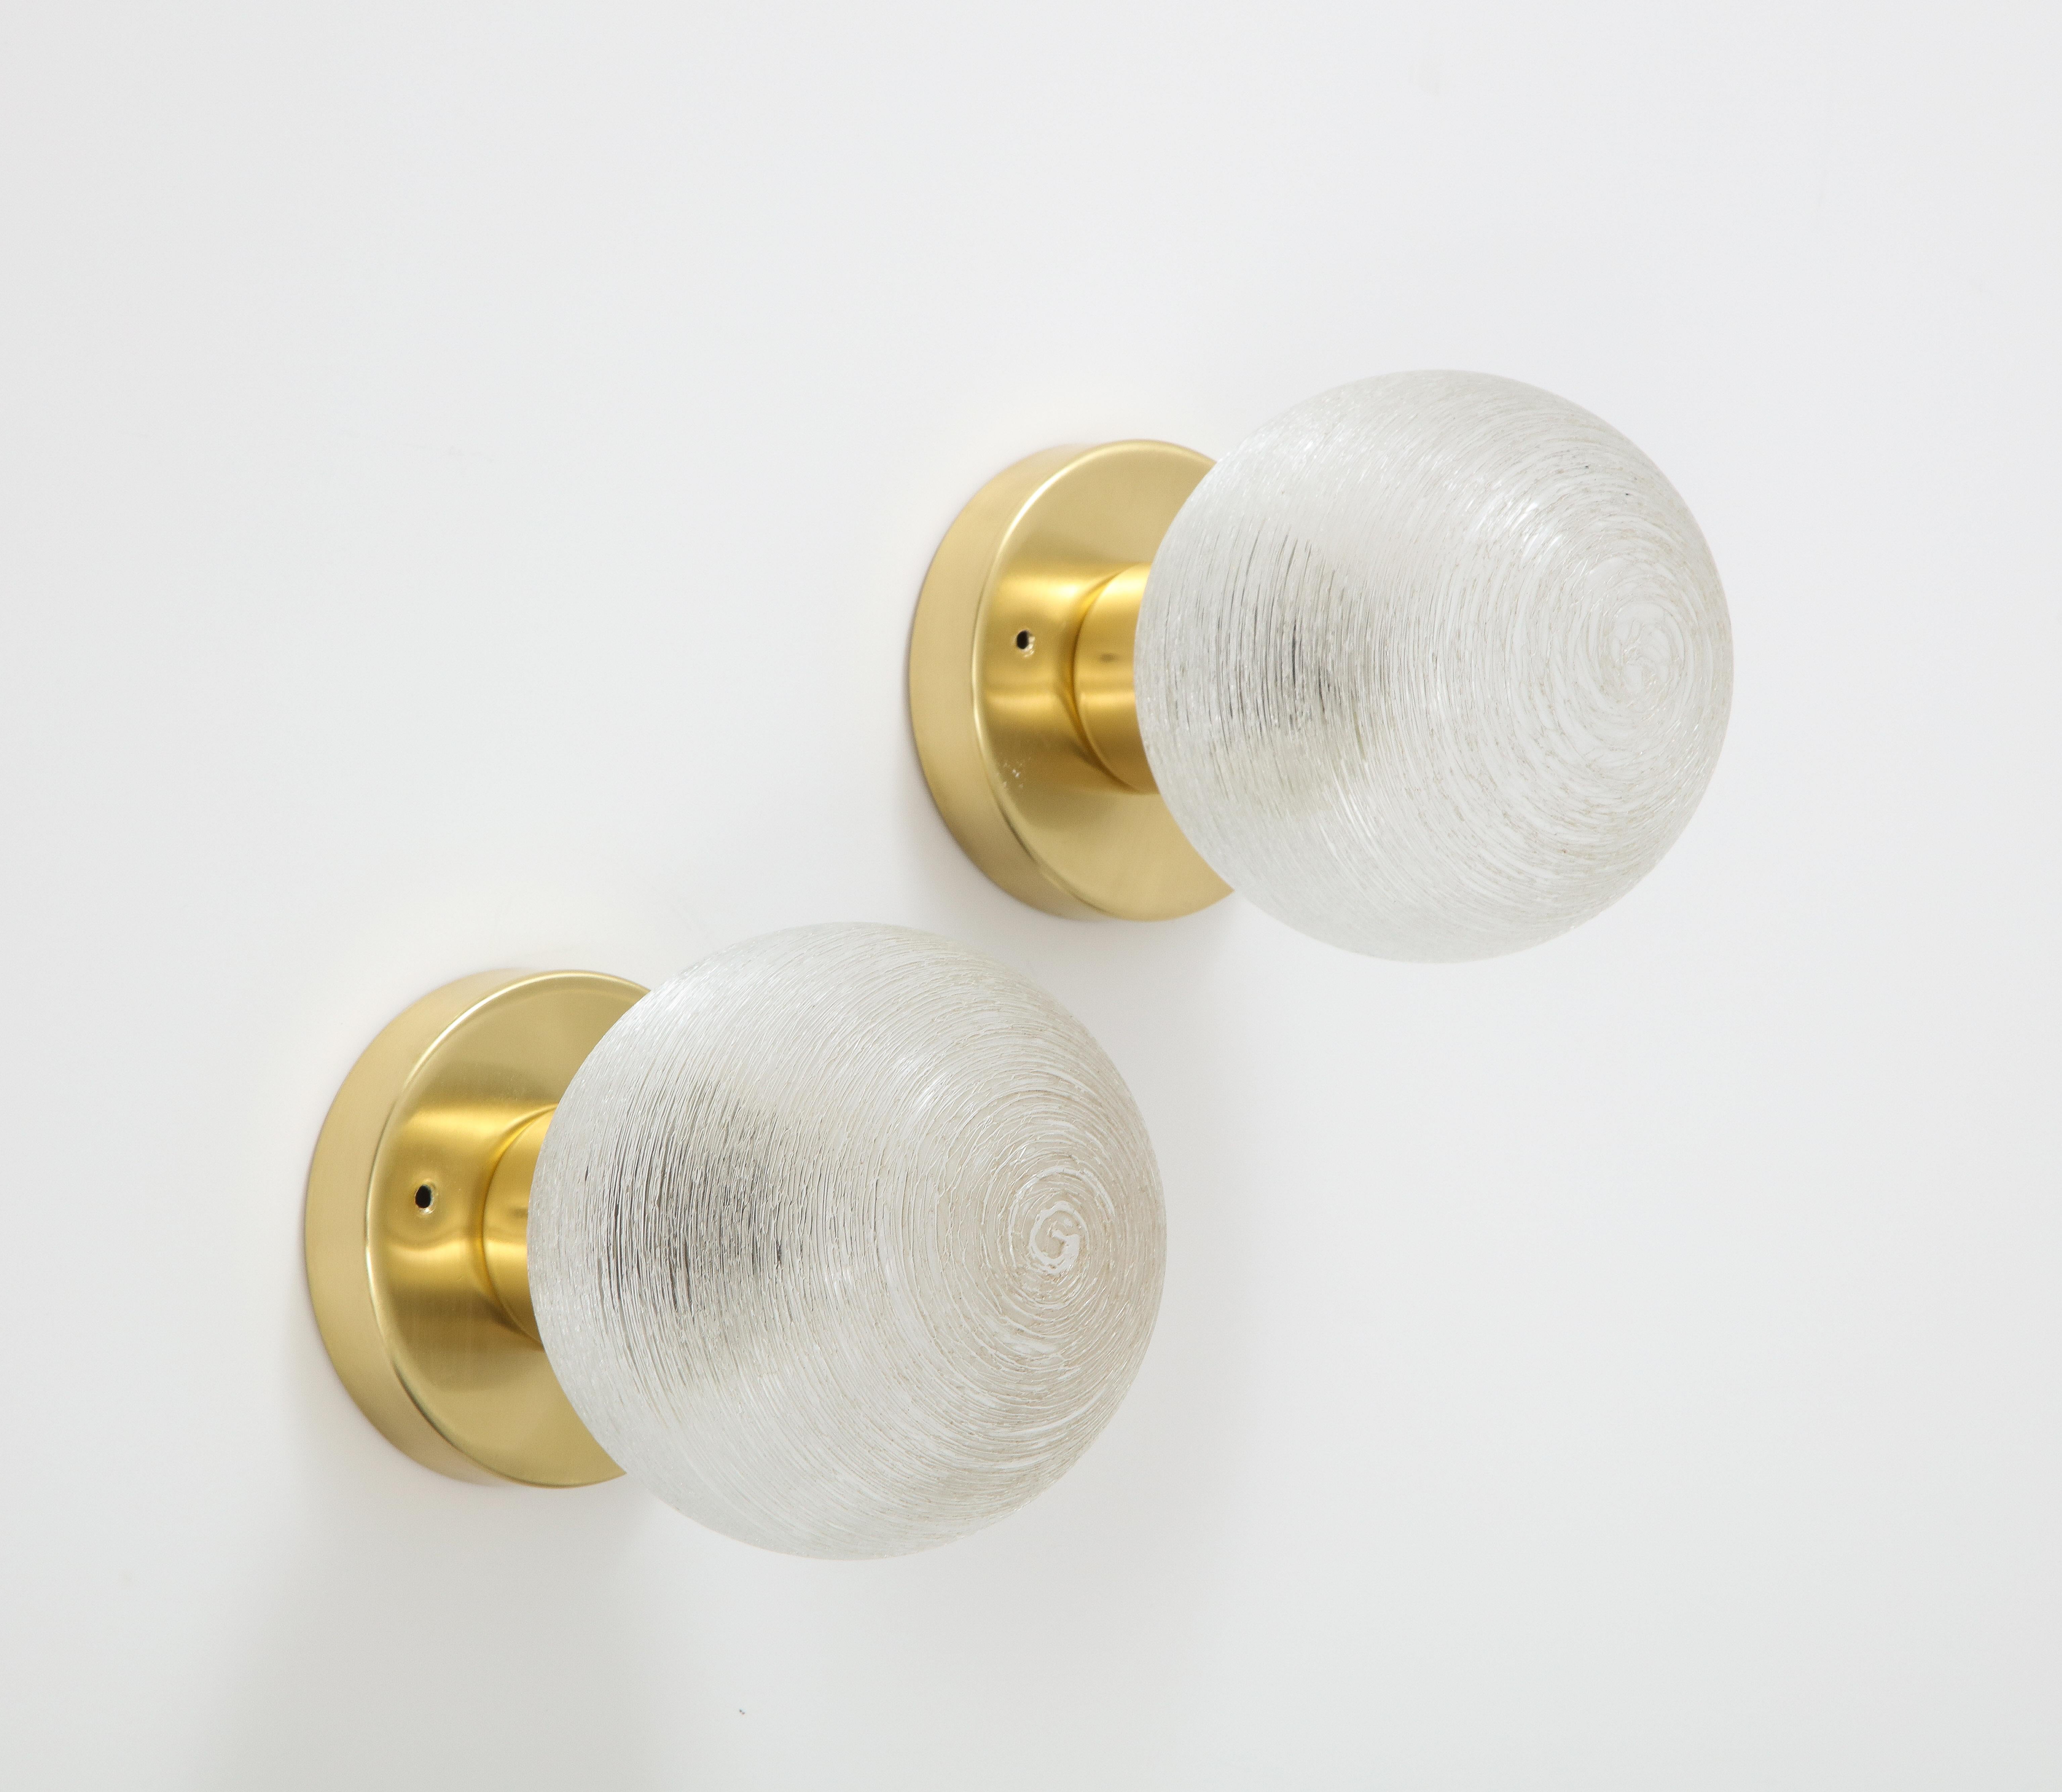 Pair of spun glass globe sconces by Doria.
The globes are mounted on polished brass bases that have been Newly rewired for the US and take a single candelabra light bulb with a 40 Watt Maximum.